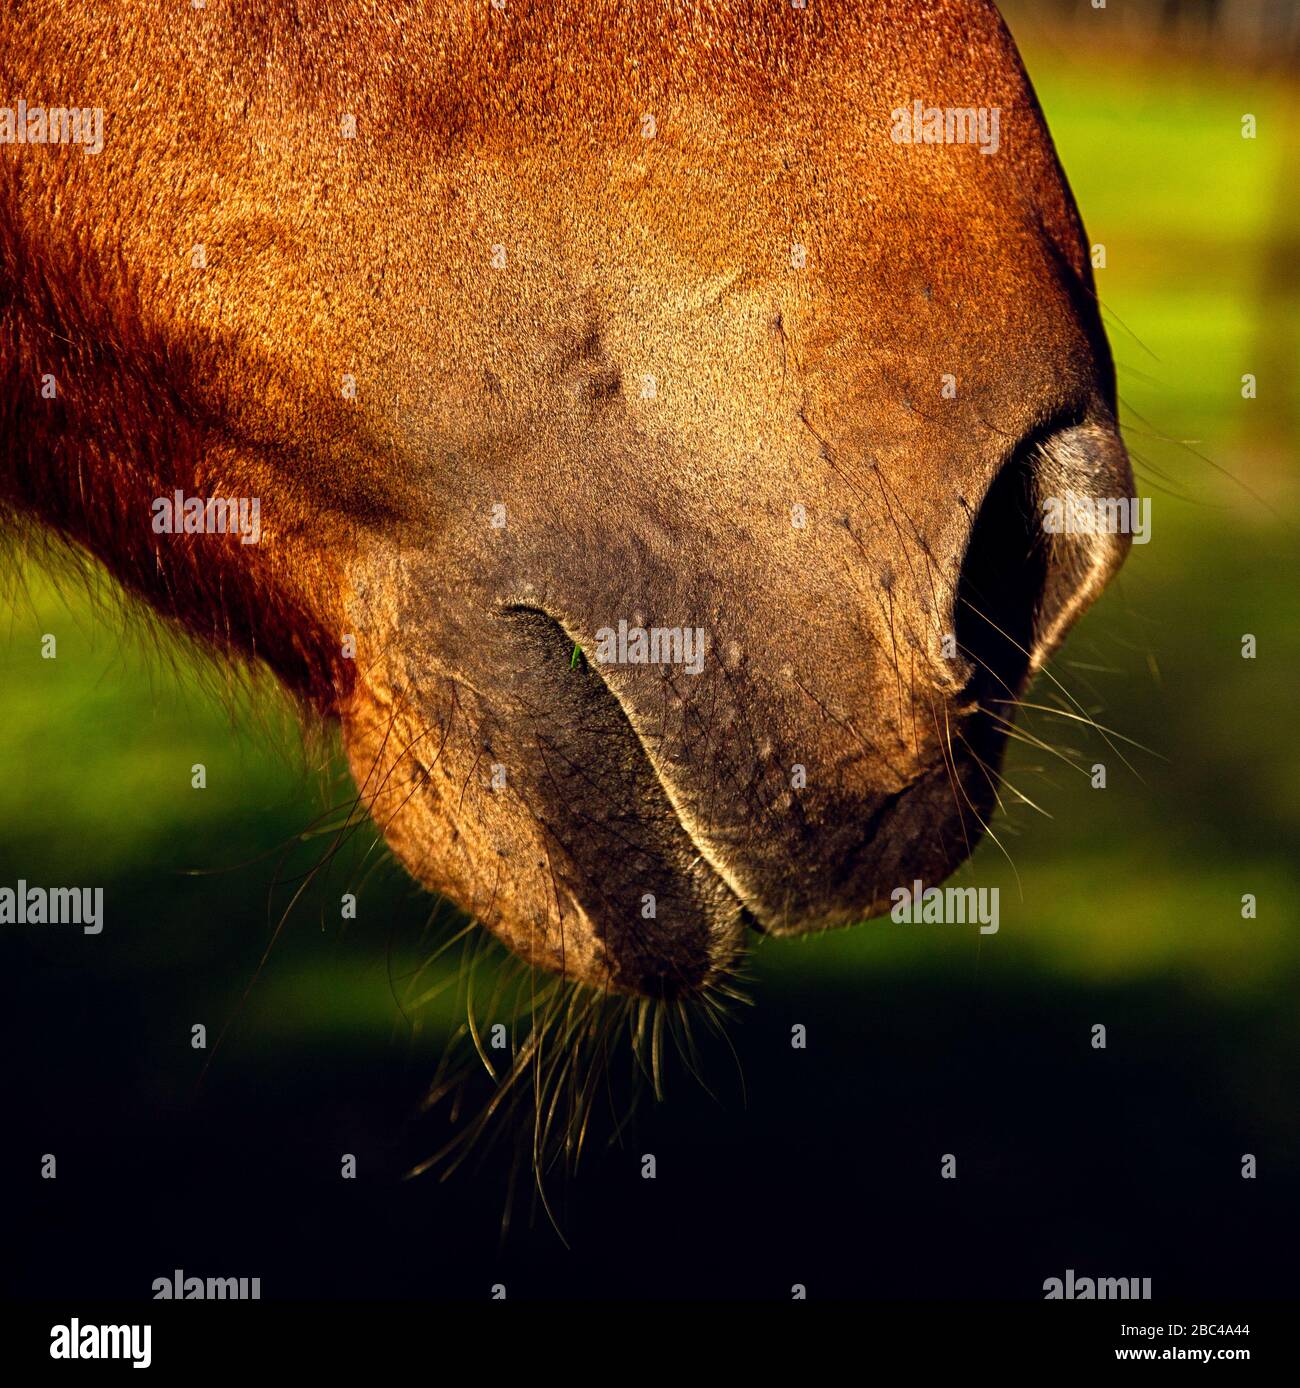 Closeup of a horse's muzzle showing nostril, mouth, chin and whiskers Stock Photo